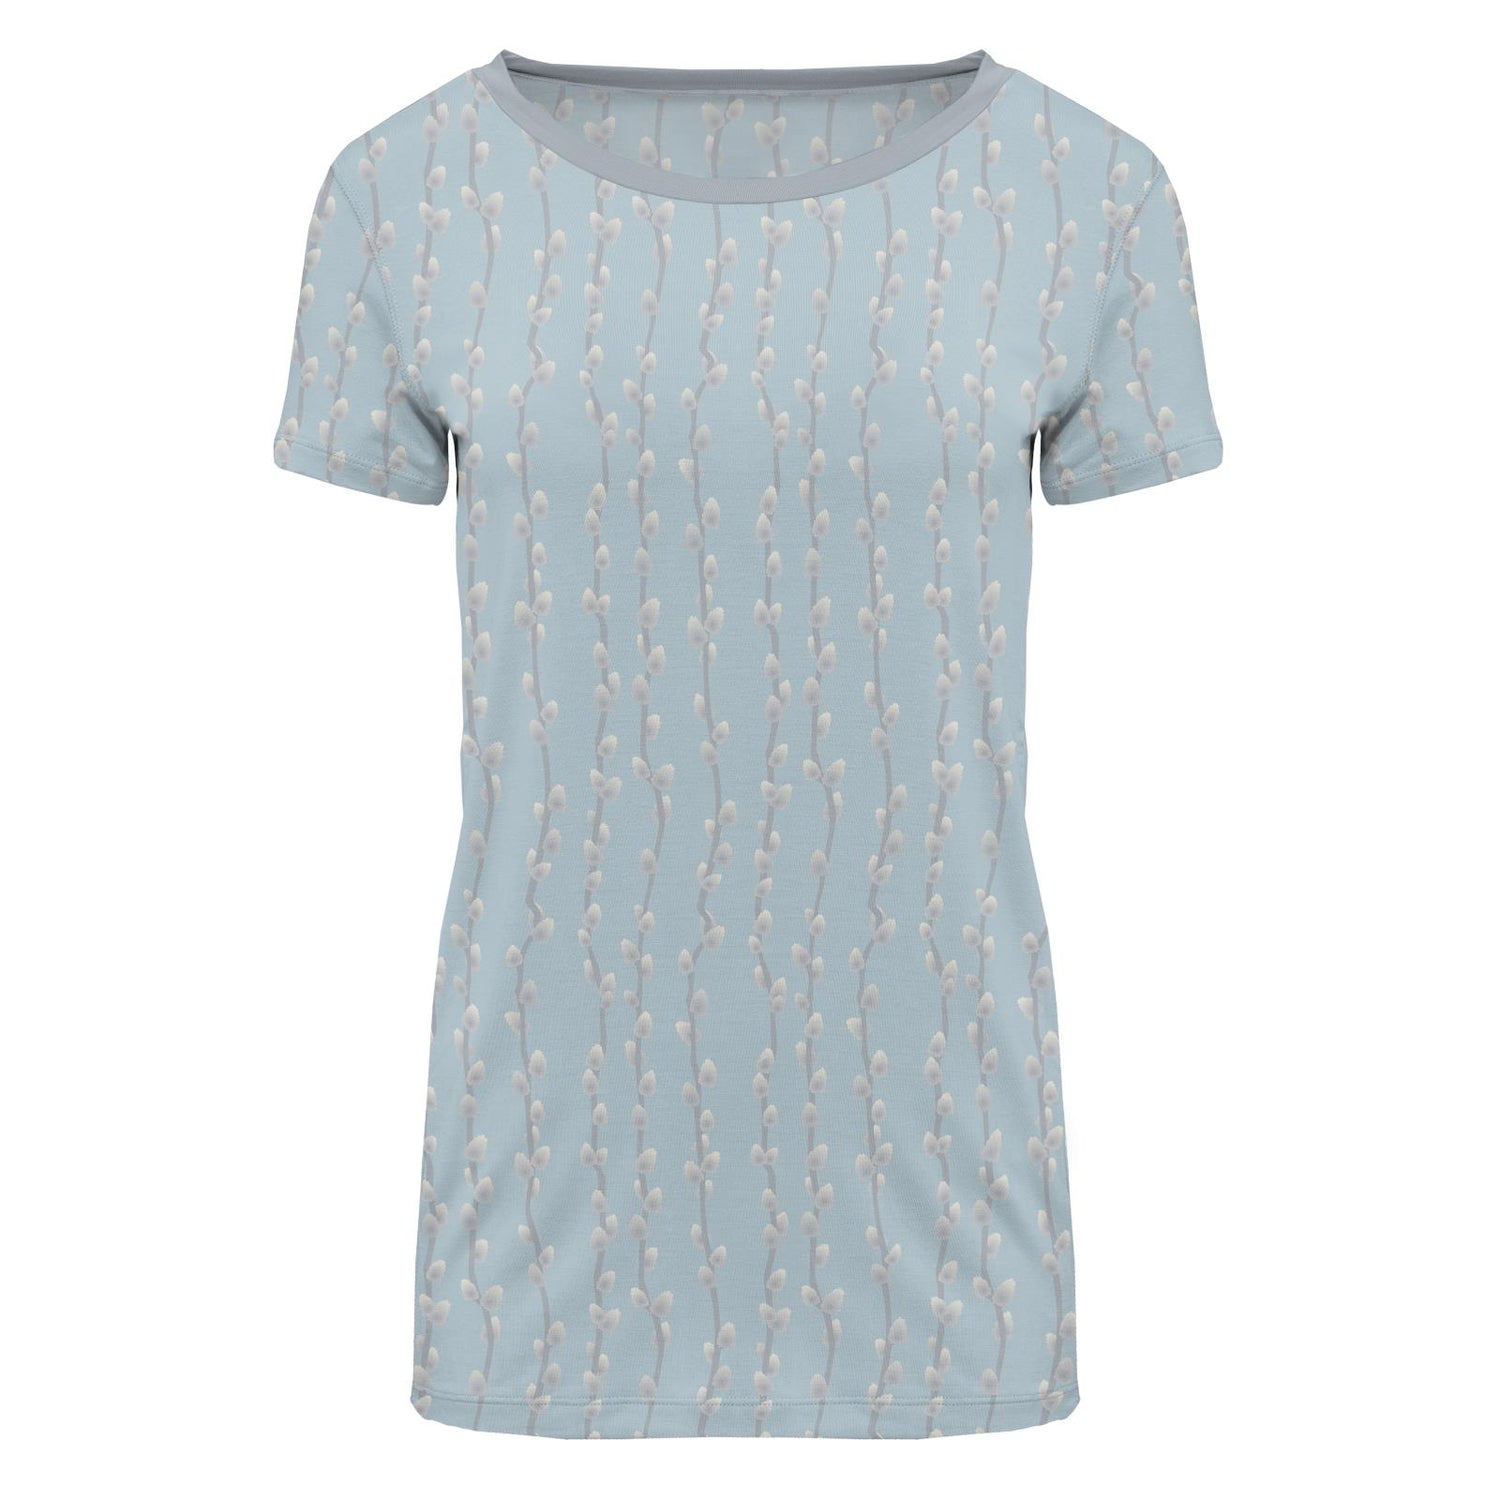 Women's Print Short Sleeve Relaxed Tee in Spring Sky Pussy Willows